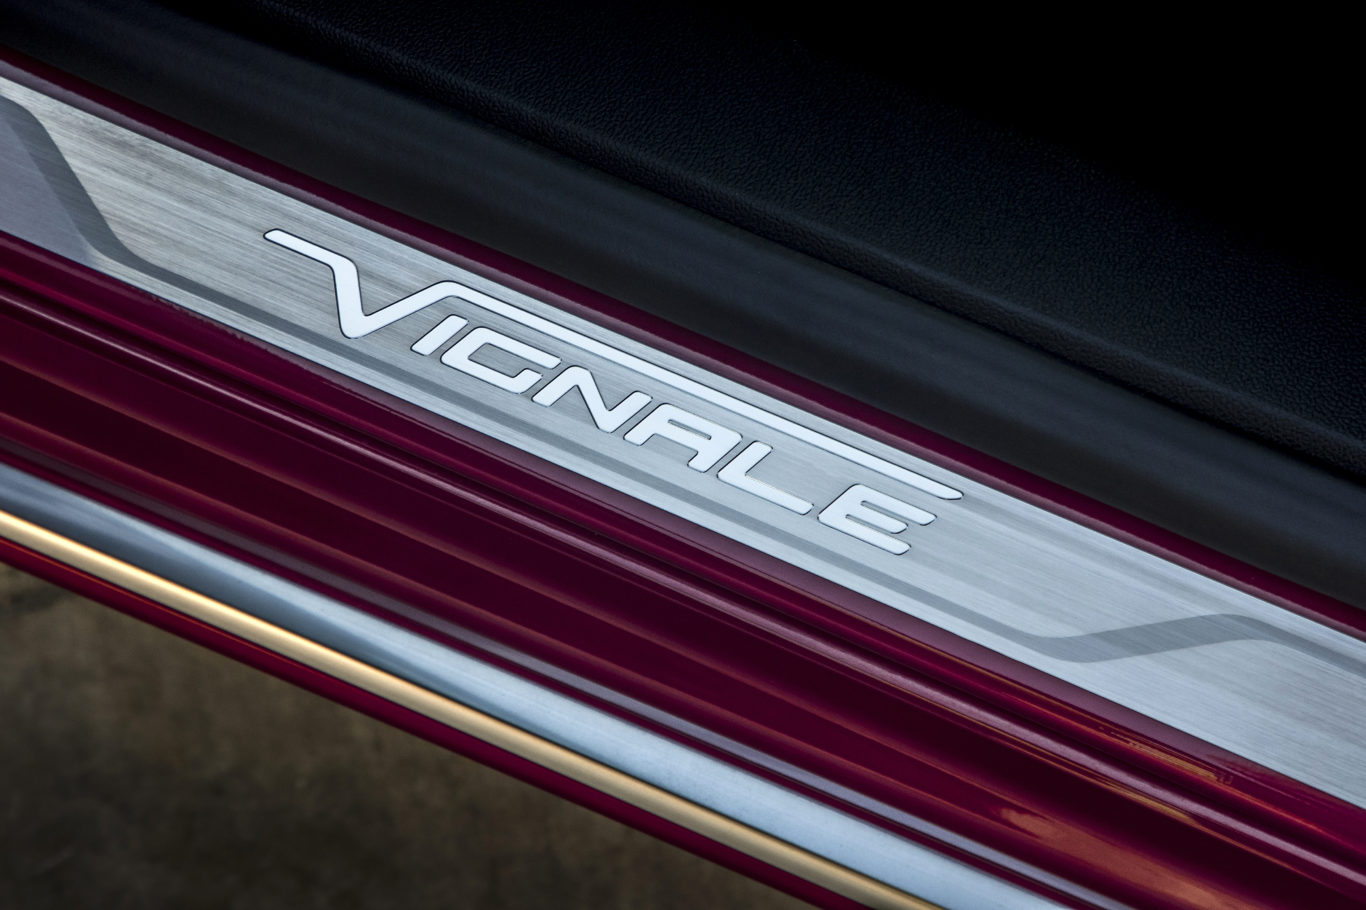 Vignale comes as the tip-top trim level